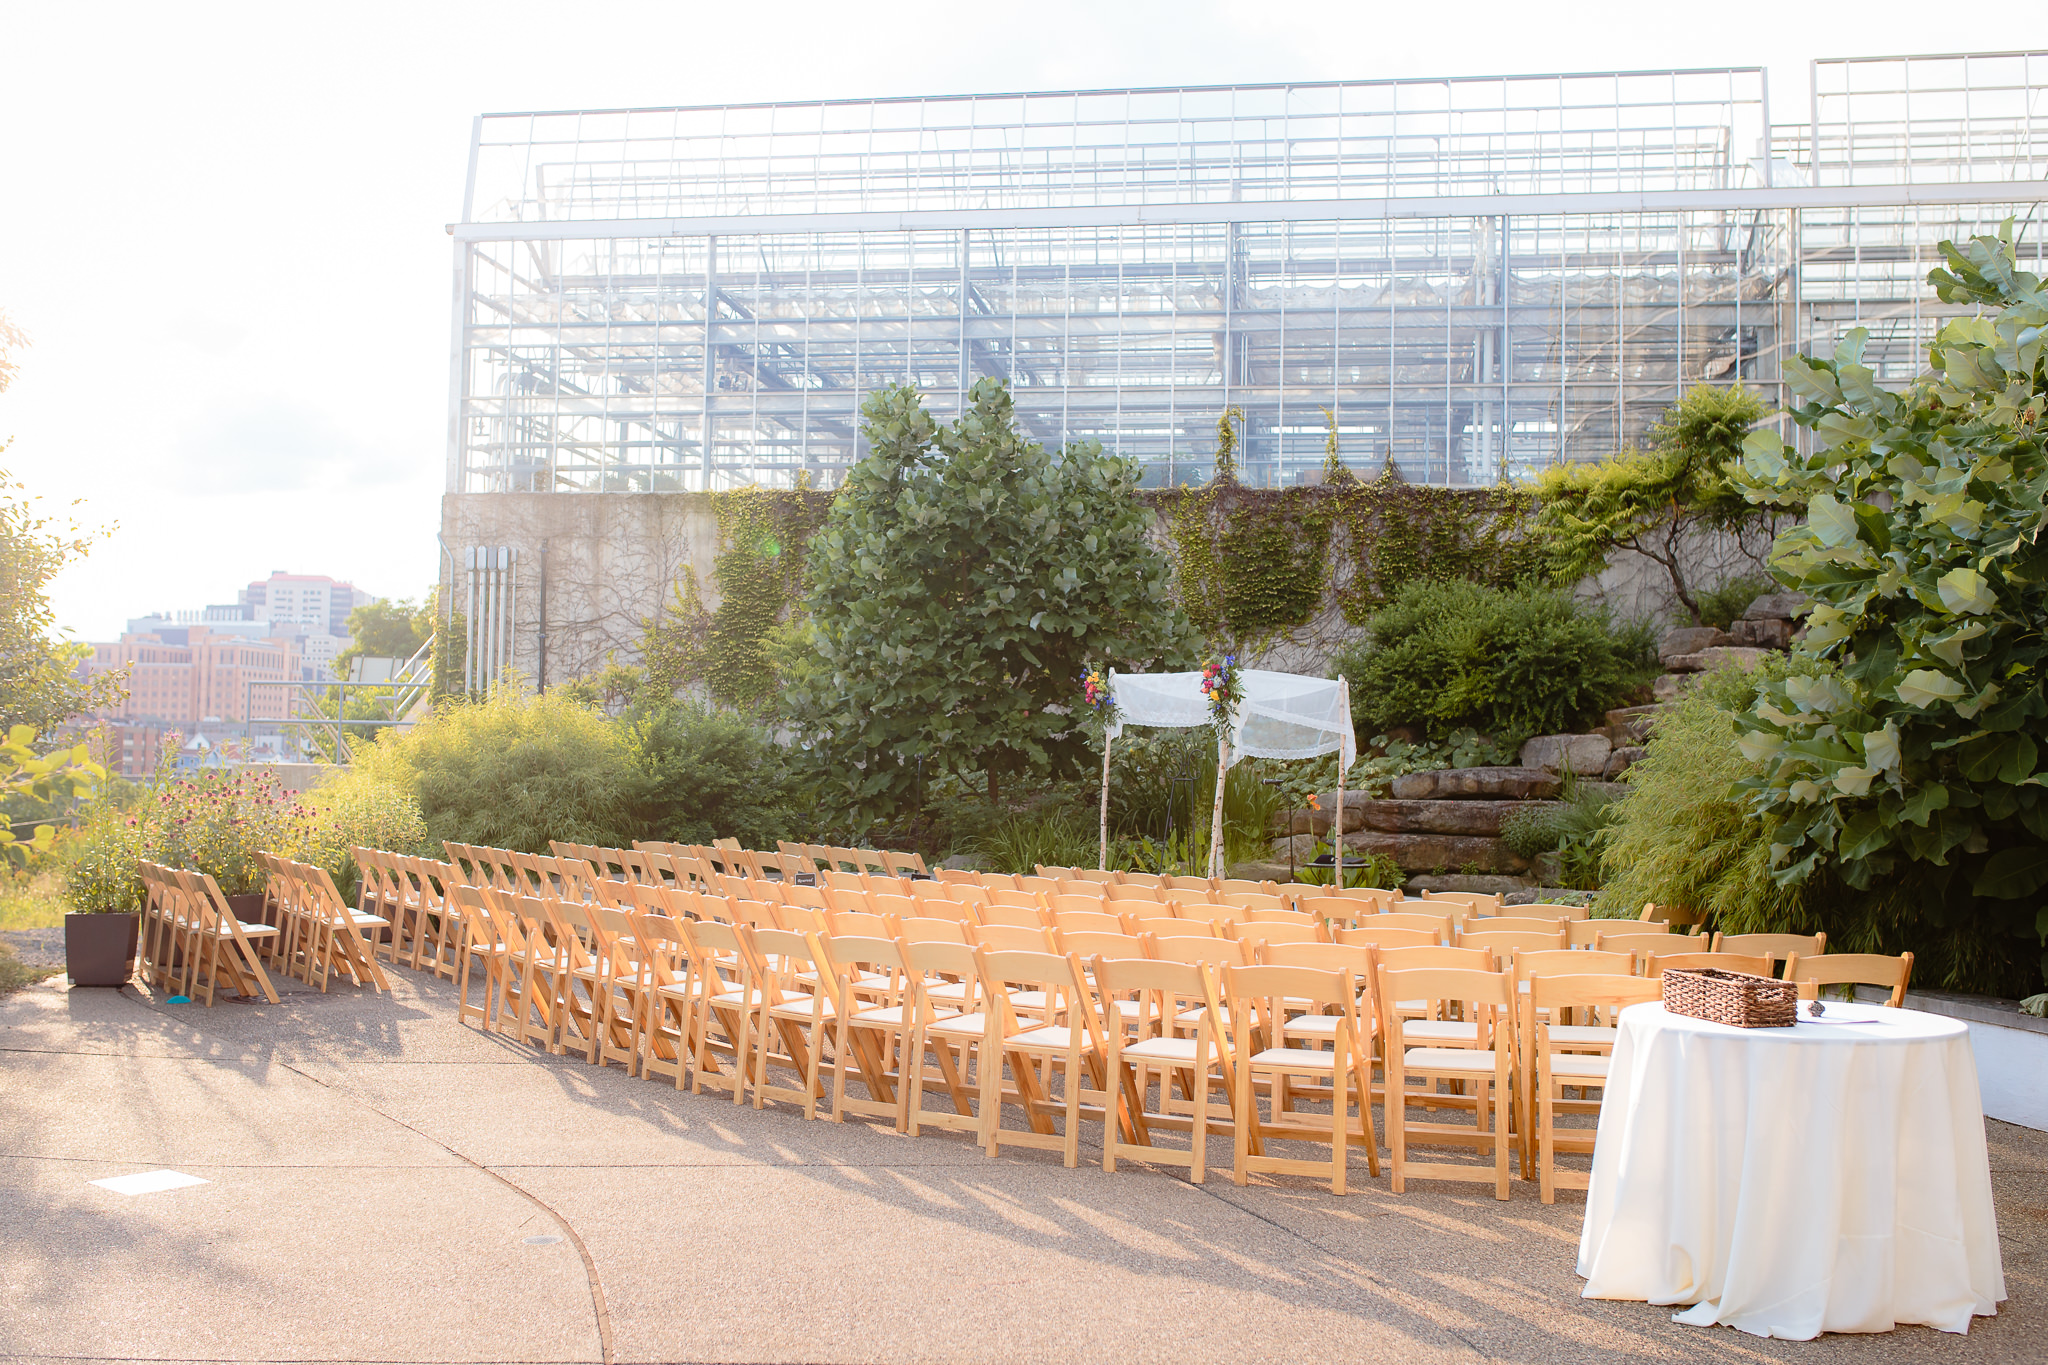 Outdoor ceremony space at Phipps Conservatory set up for a Jewish wedding